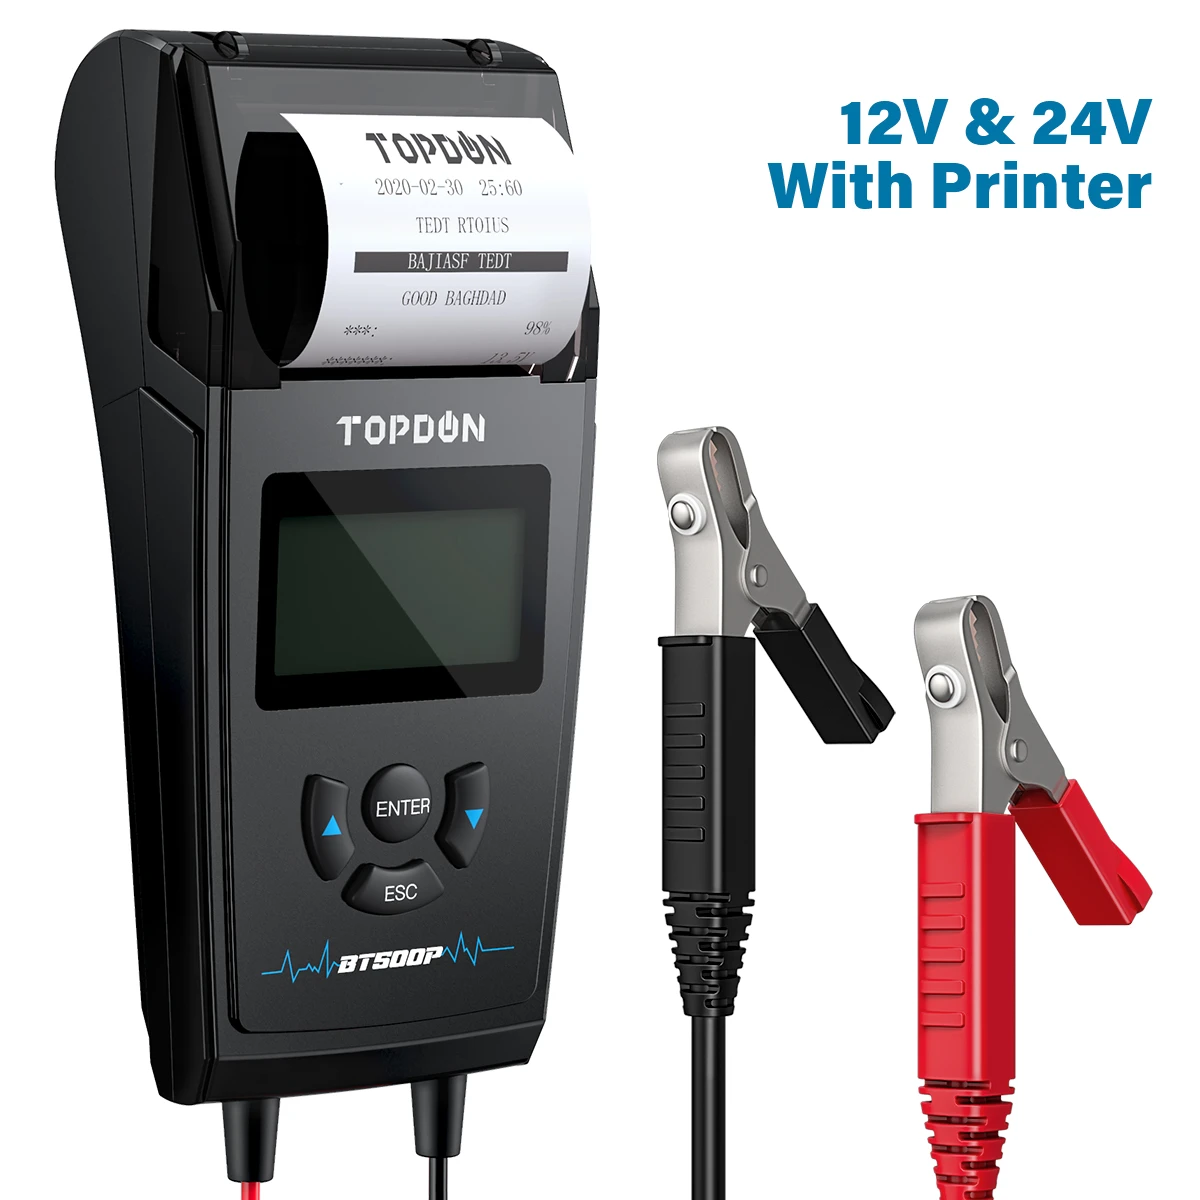 12V 24V Car Truck Battery Tester with Printer TOPDON BT500P is 2020 newest product for many cars